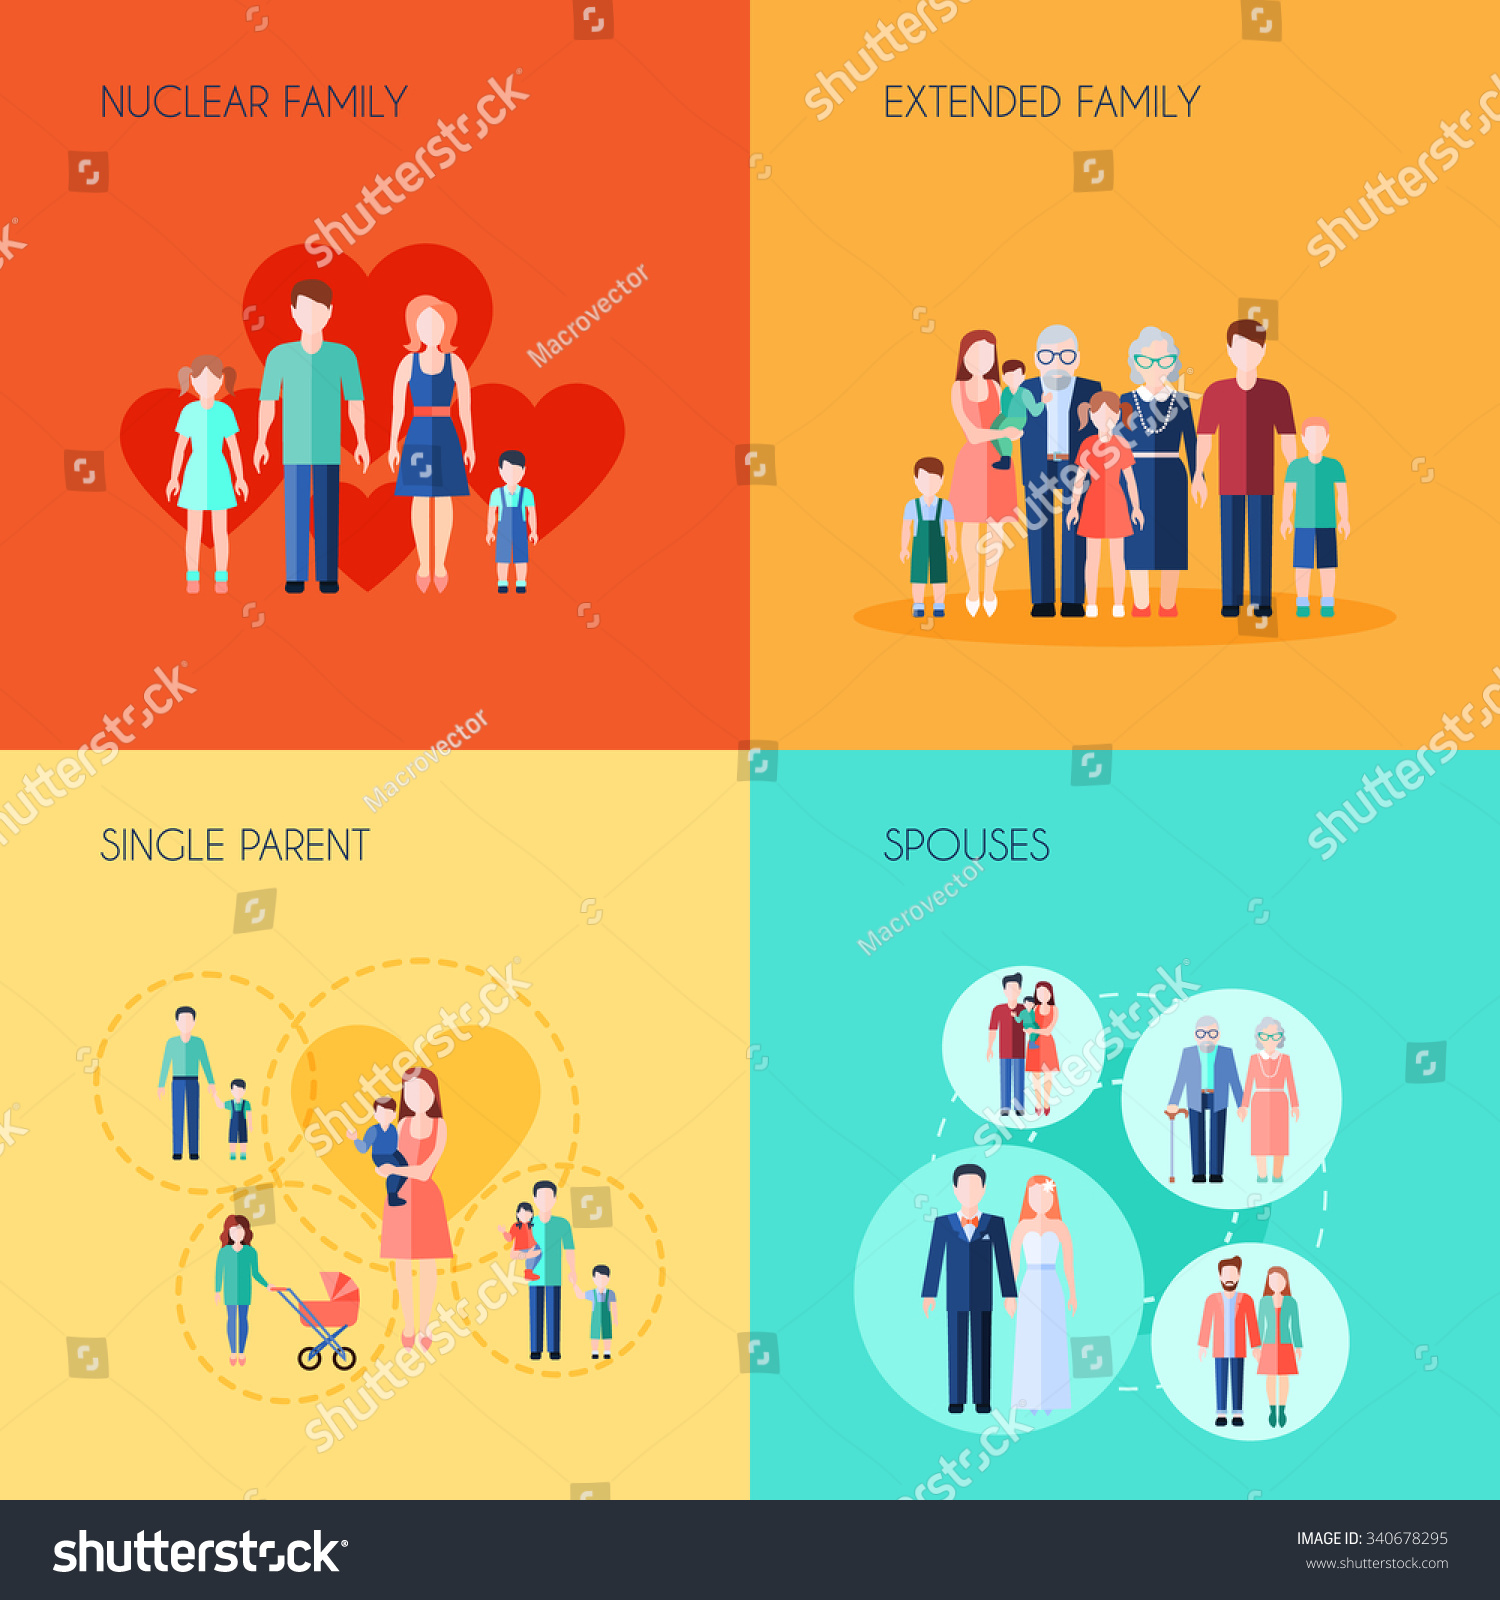 clipart of nuclear family - photo #20